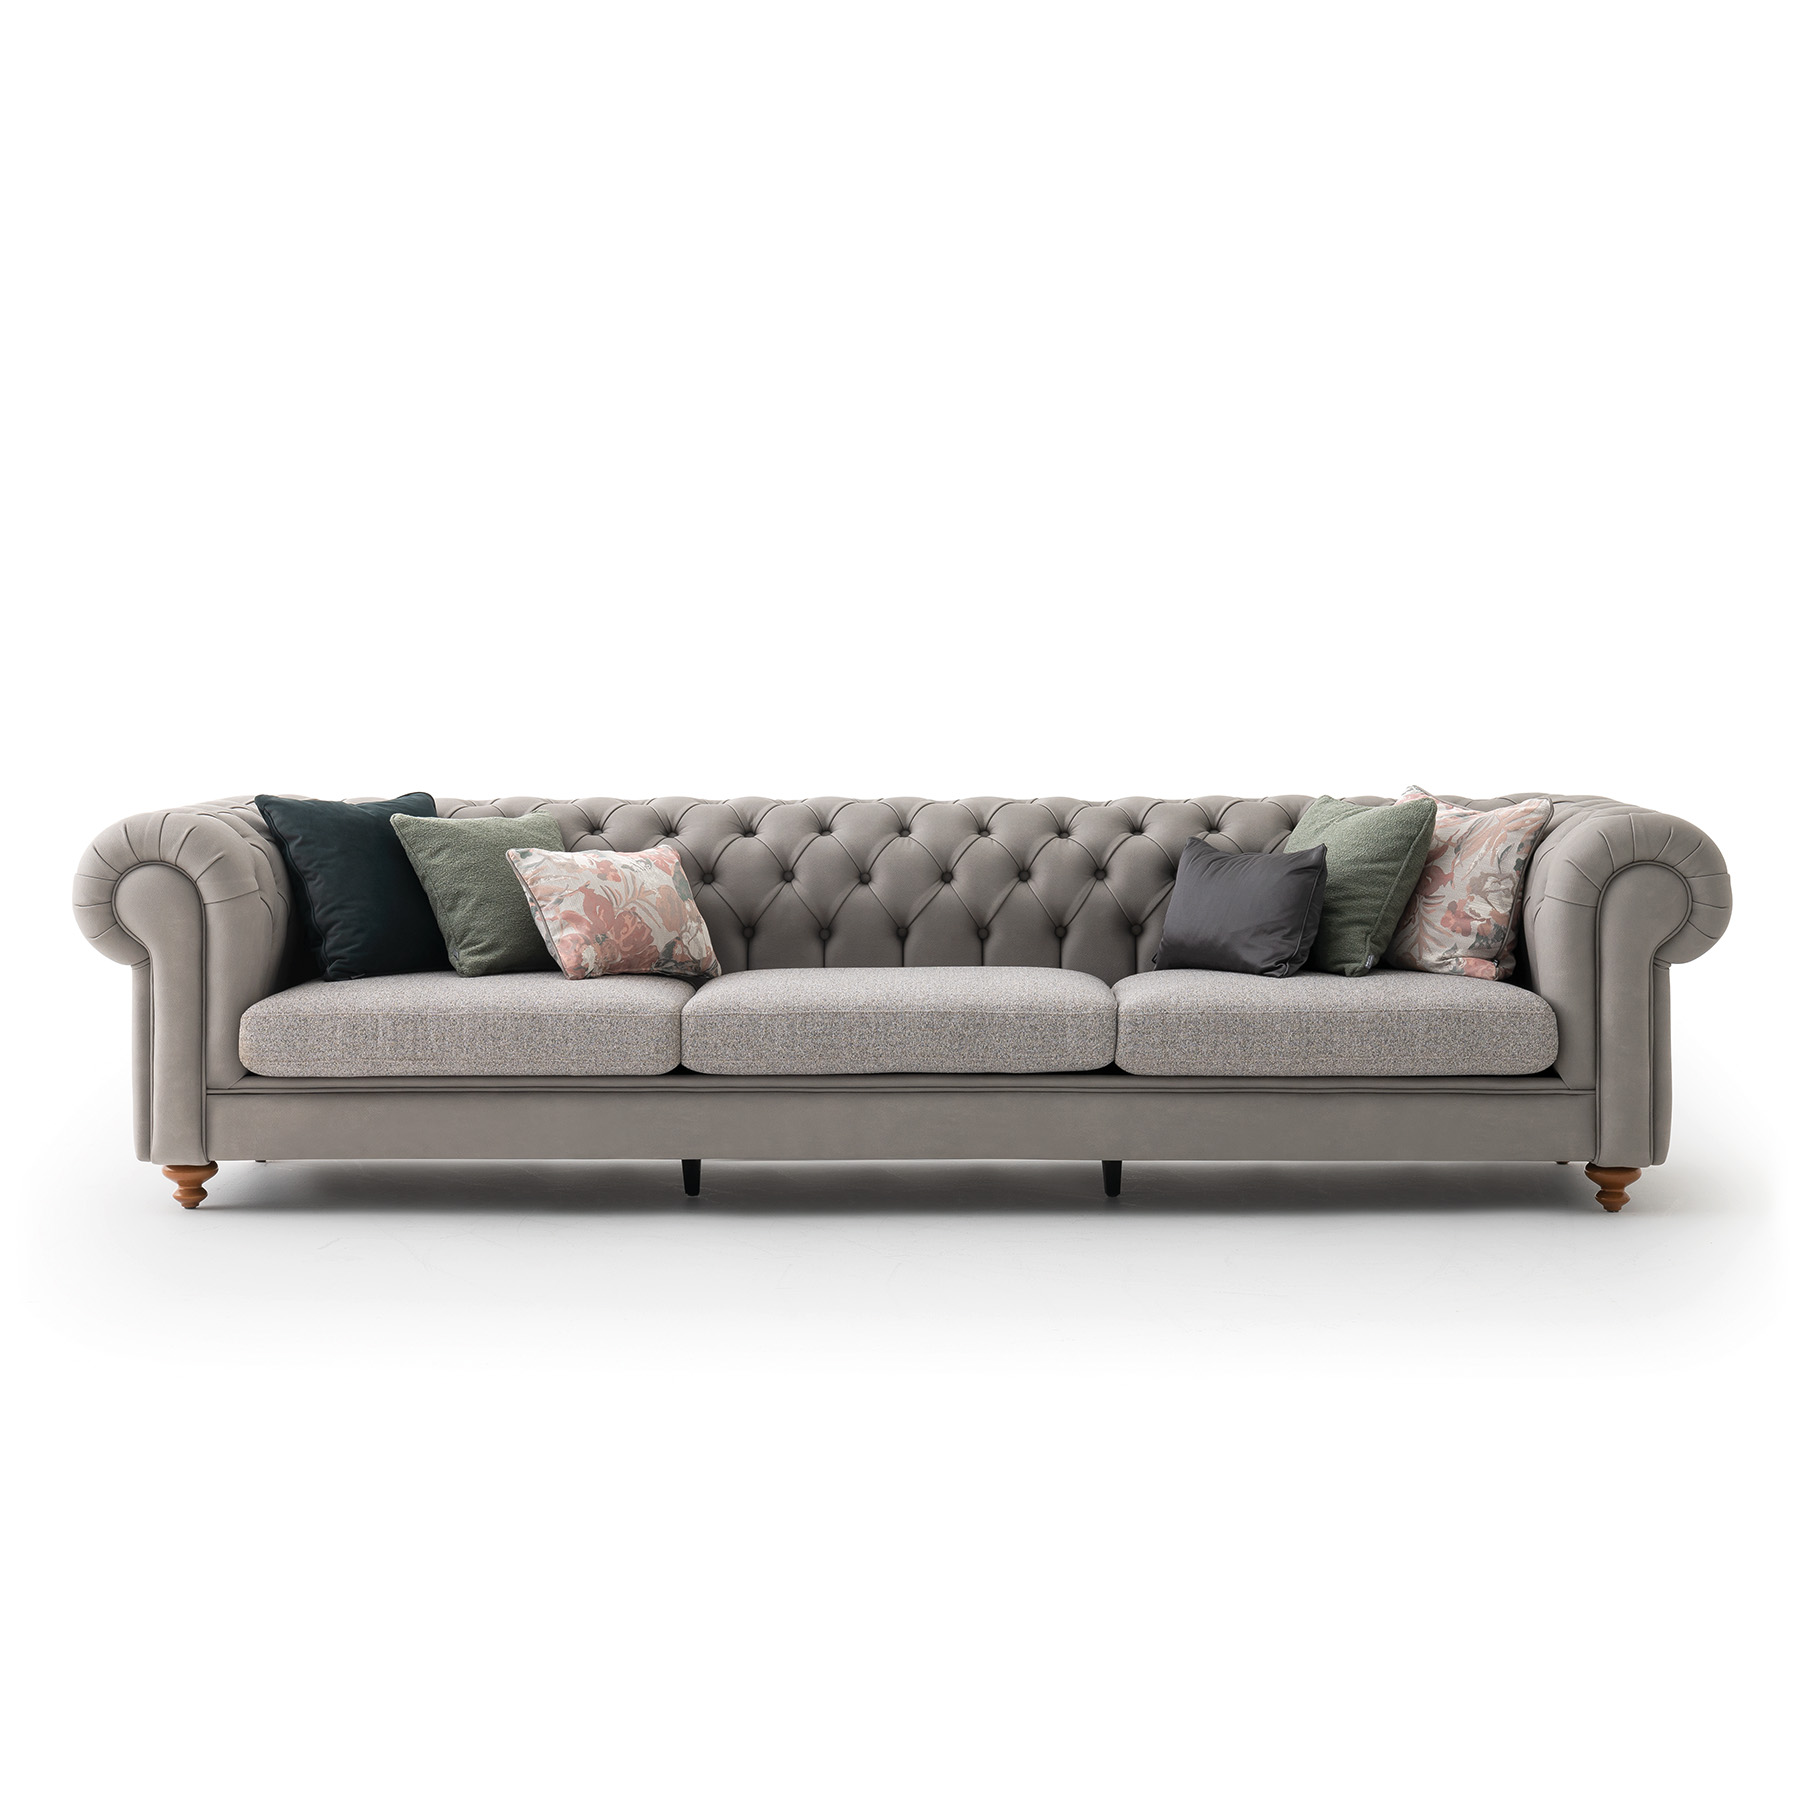 Aspendos Chesterfield Sofa in Gray leather combination with fabric upholstery